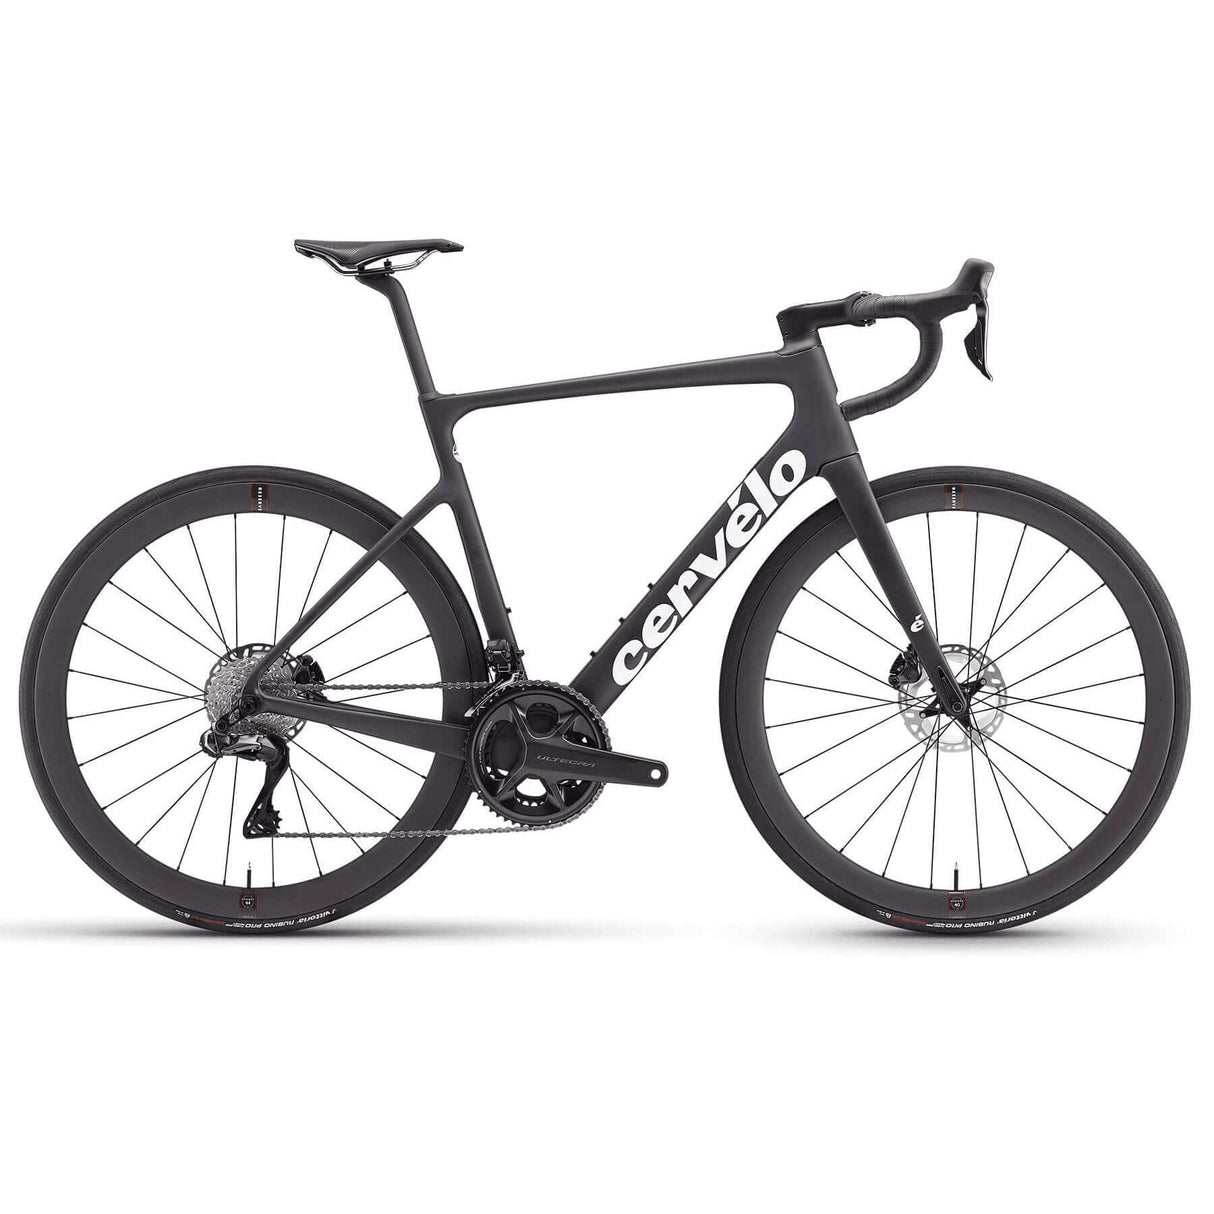 Cervelo Caledonia-5 Ultegra Di2 | Strictly Bicycles